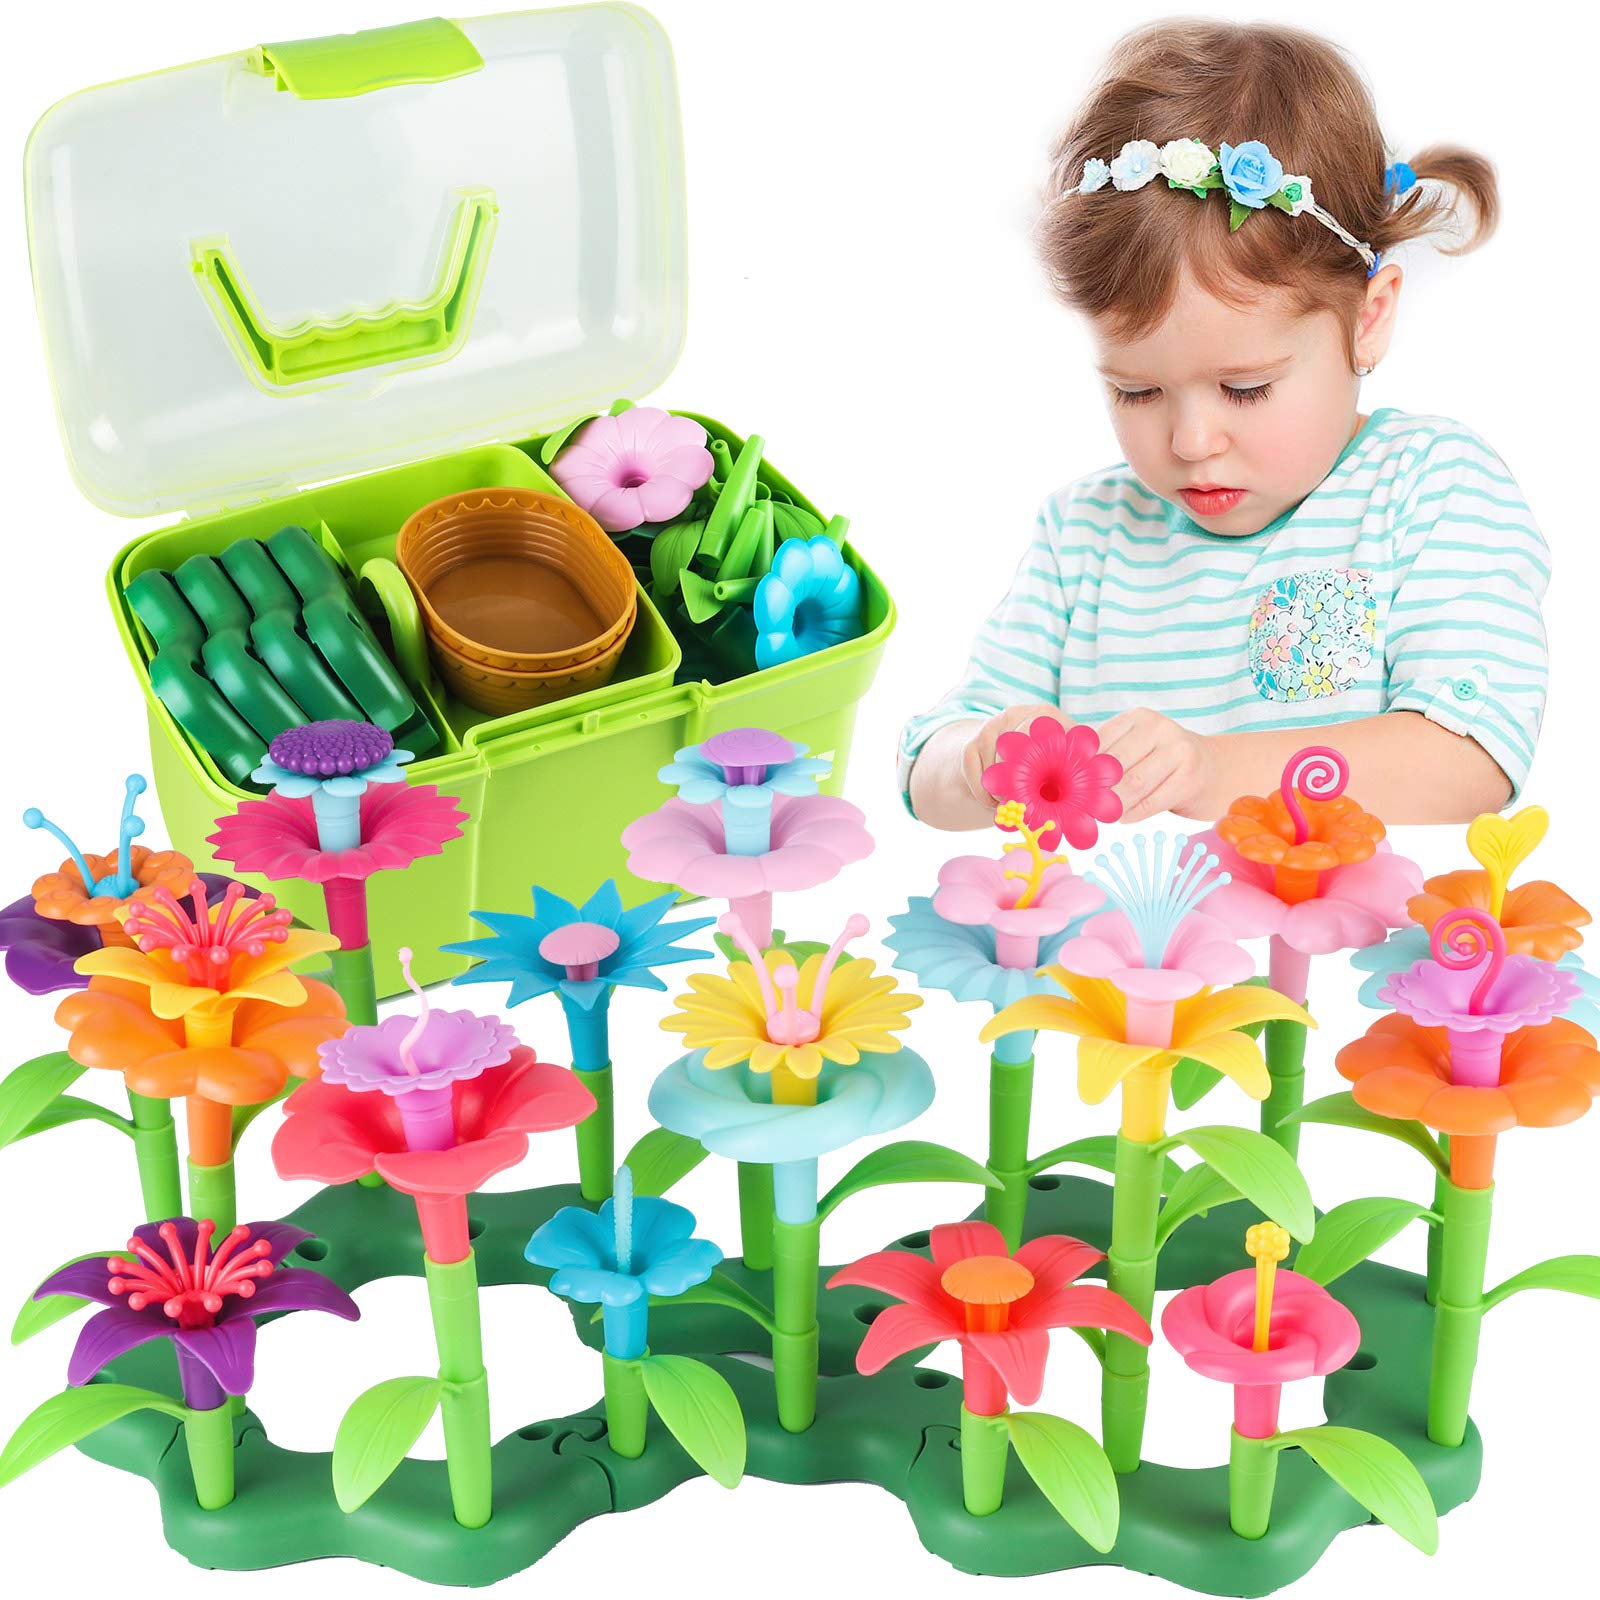 Girls Toys Age 3-6 Year Old Toddler Toys for Girls Gifts Flower Garden Building Toy Educational Activity Stem Toys(130 PCS)